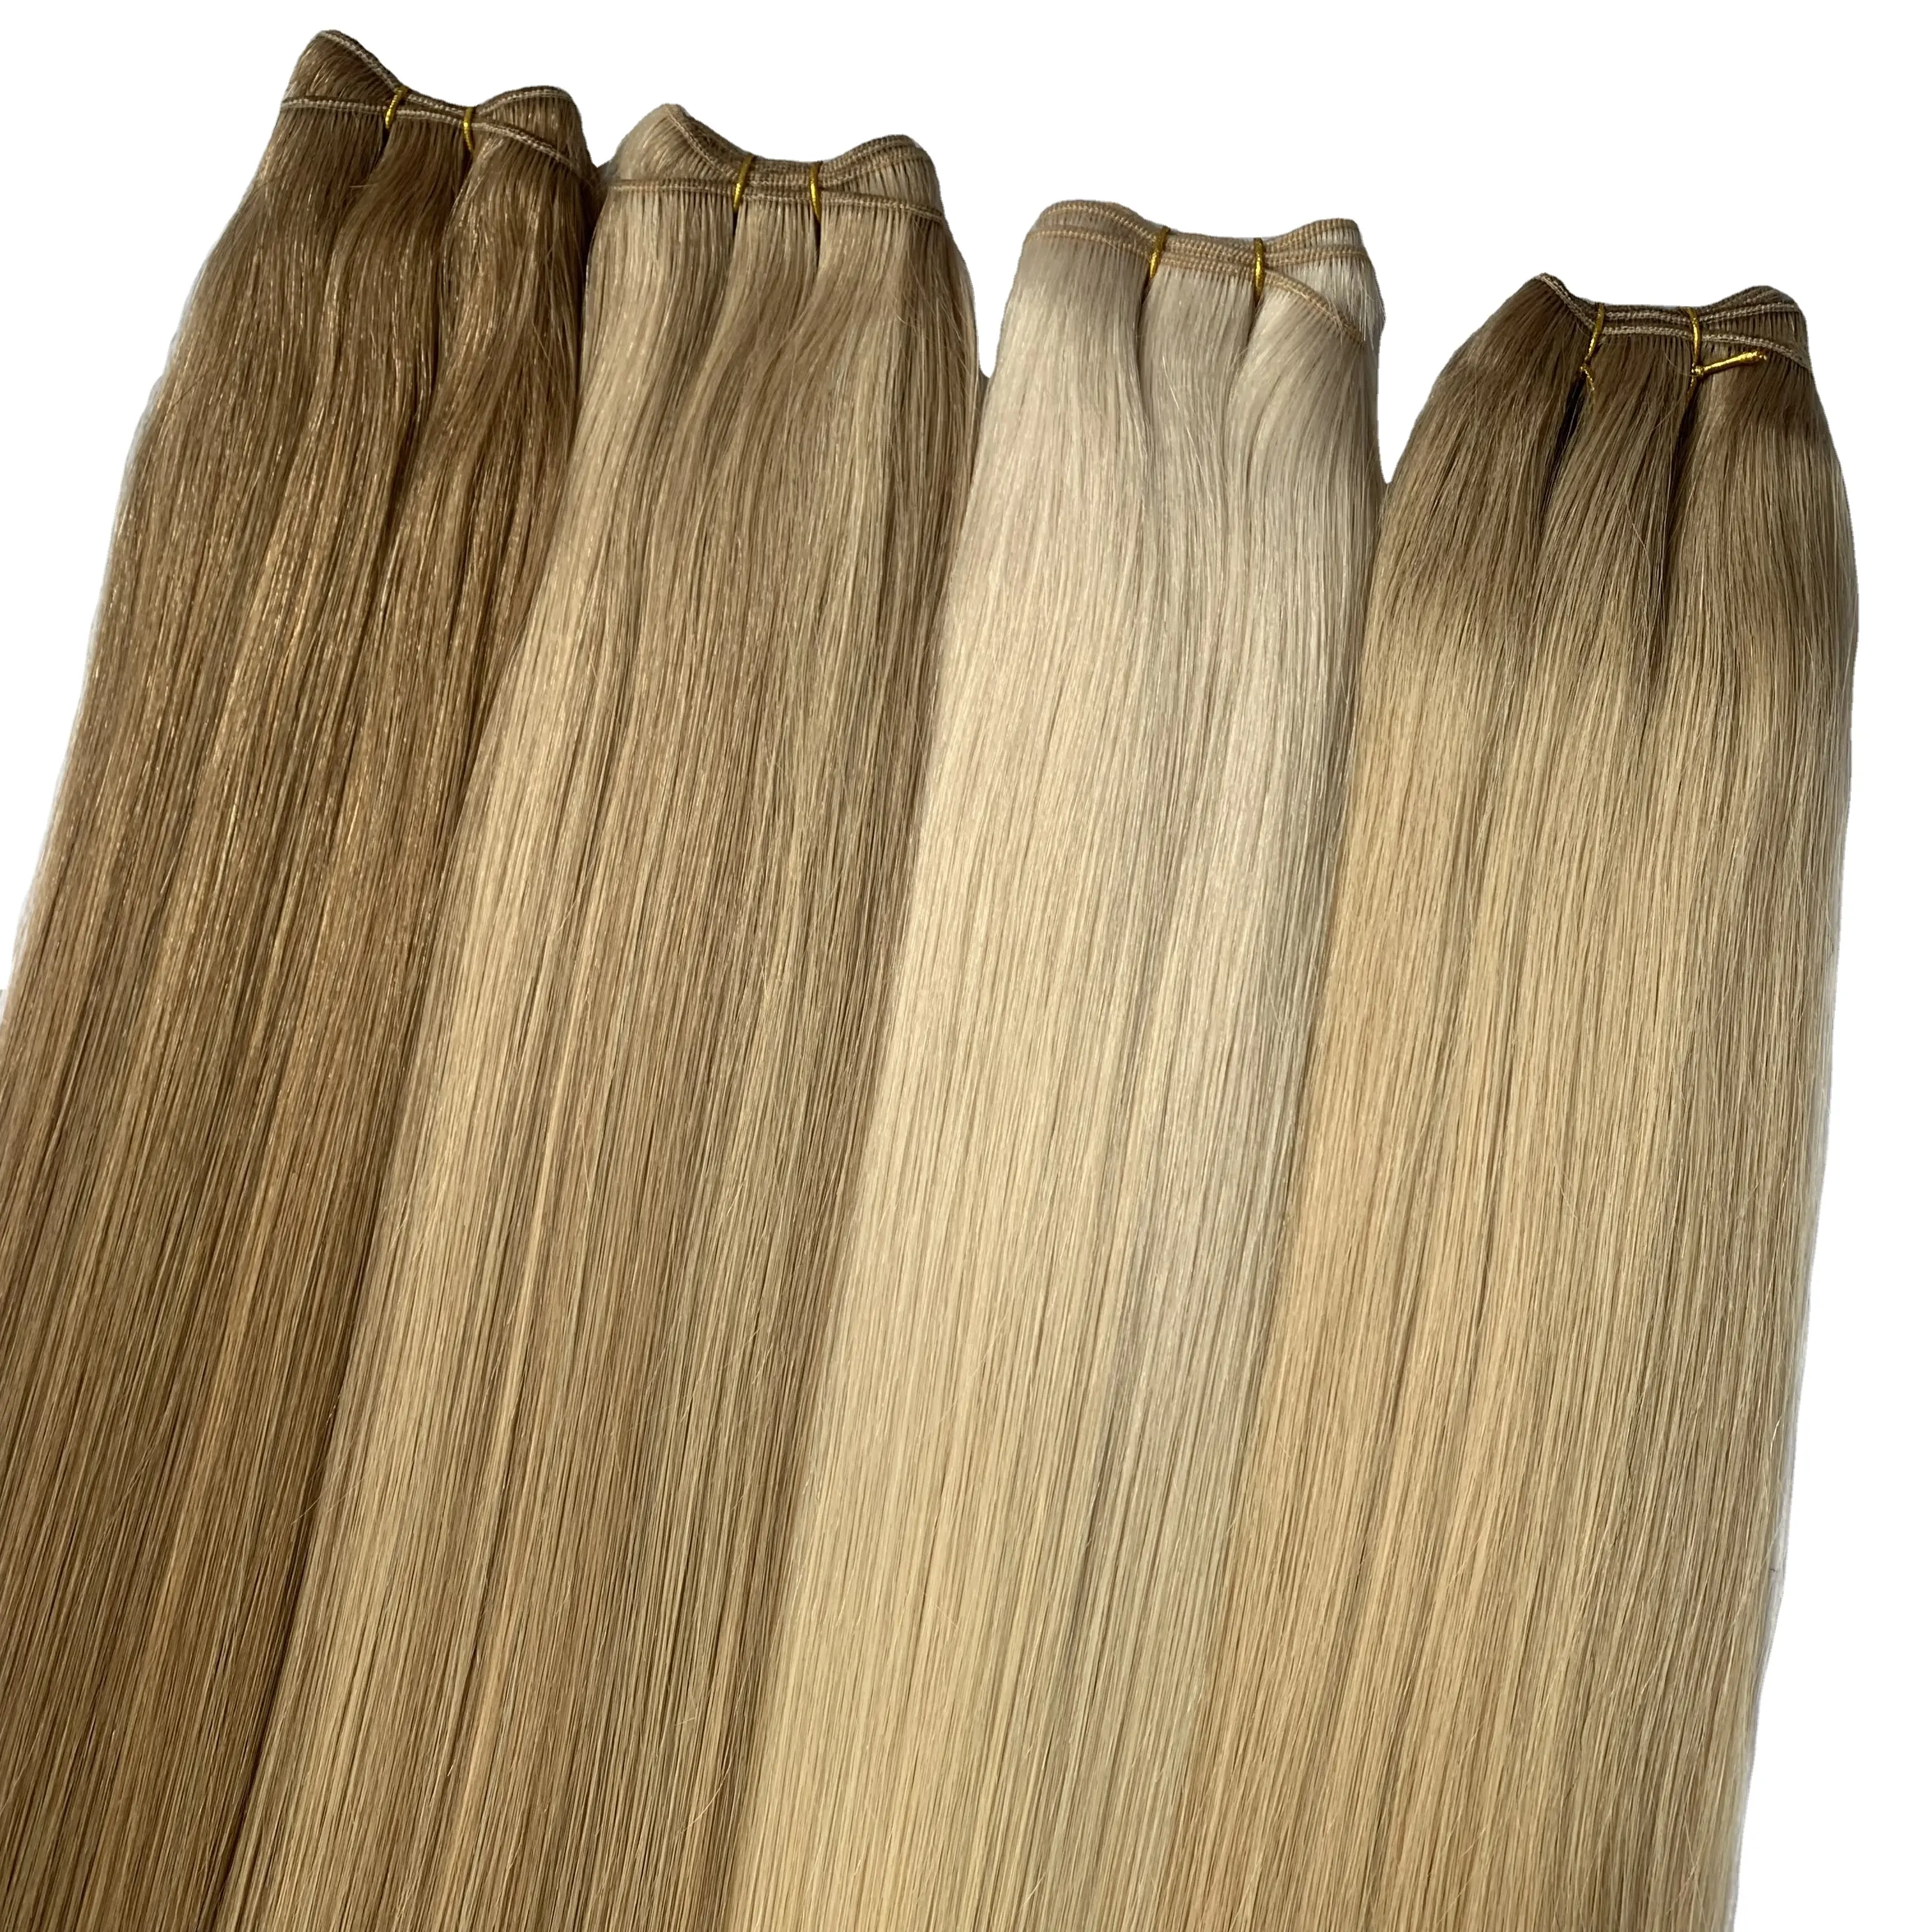 Wholesale Natural 100% Remy Human Hair Straight Machine Made Weft Hair Extension Double Drawn Hair Weaving For Beauty Women